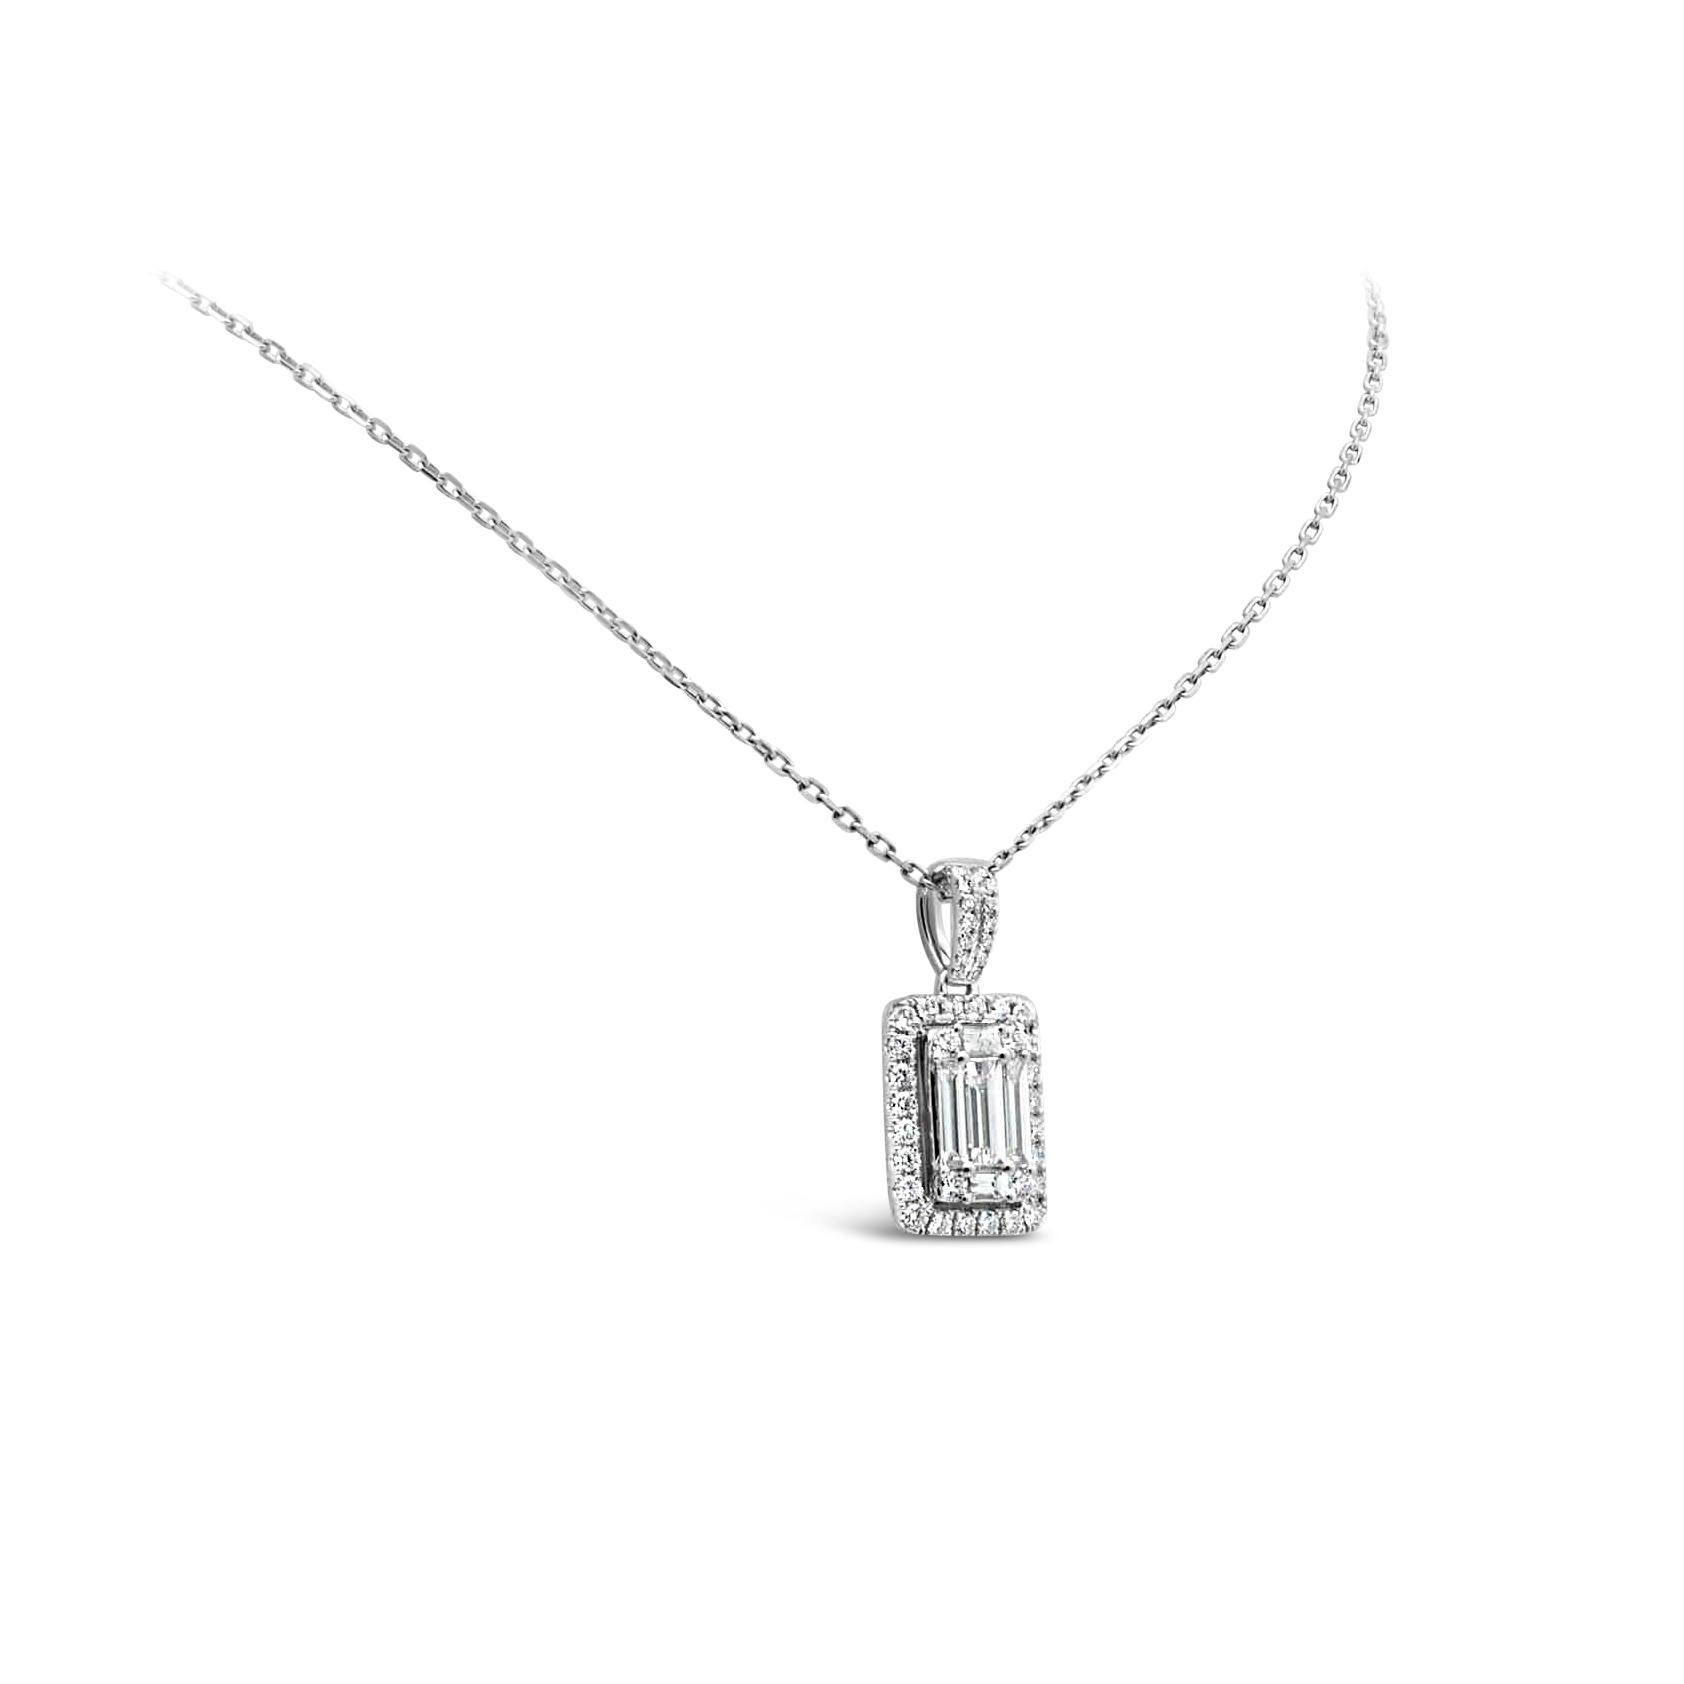 Showcasing baguette diamonds connected to look like a single large emerald cut diamond. Center diamond is surrounded by a diamond halo on an accented bale. Suspended on an 18K white gold chain.

Roman Malakov is a custom house, specializing in